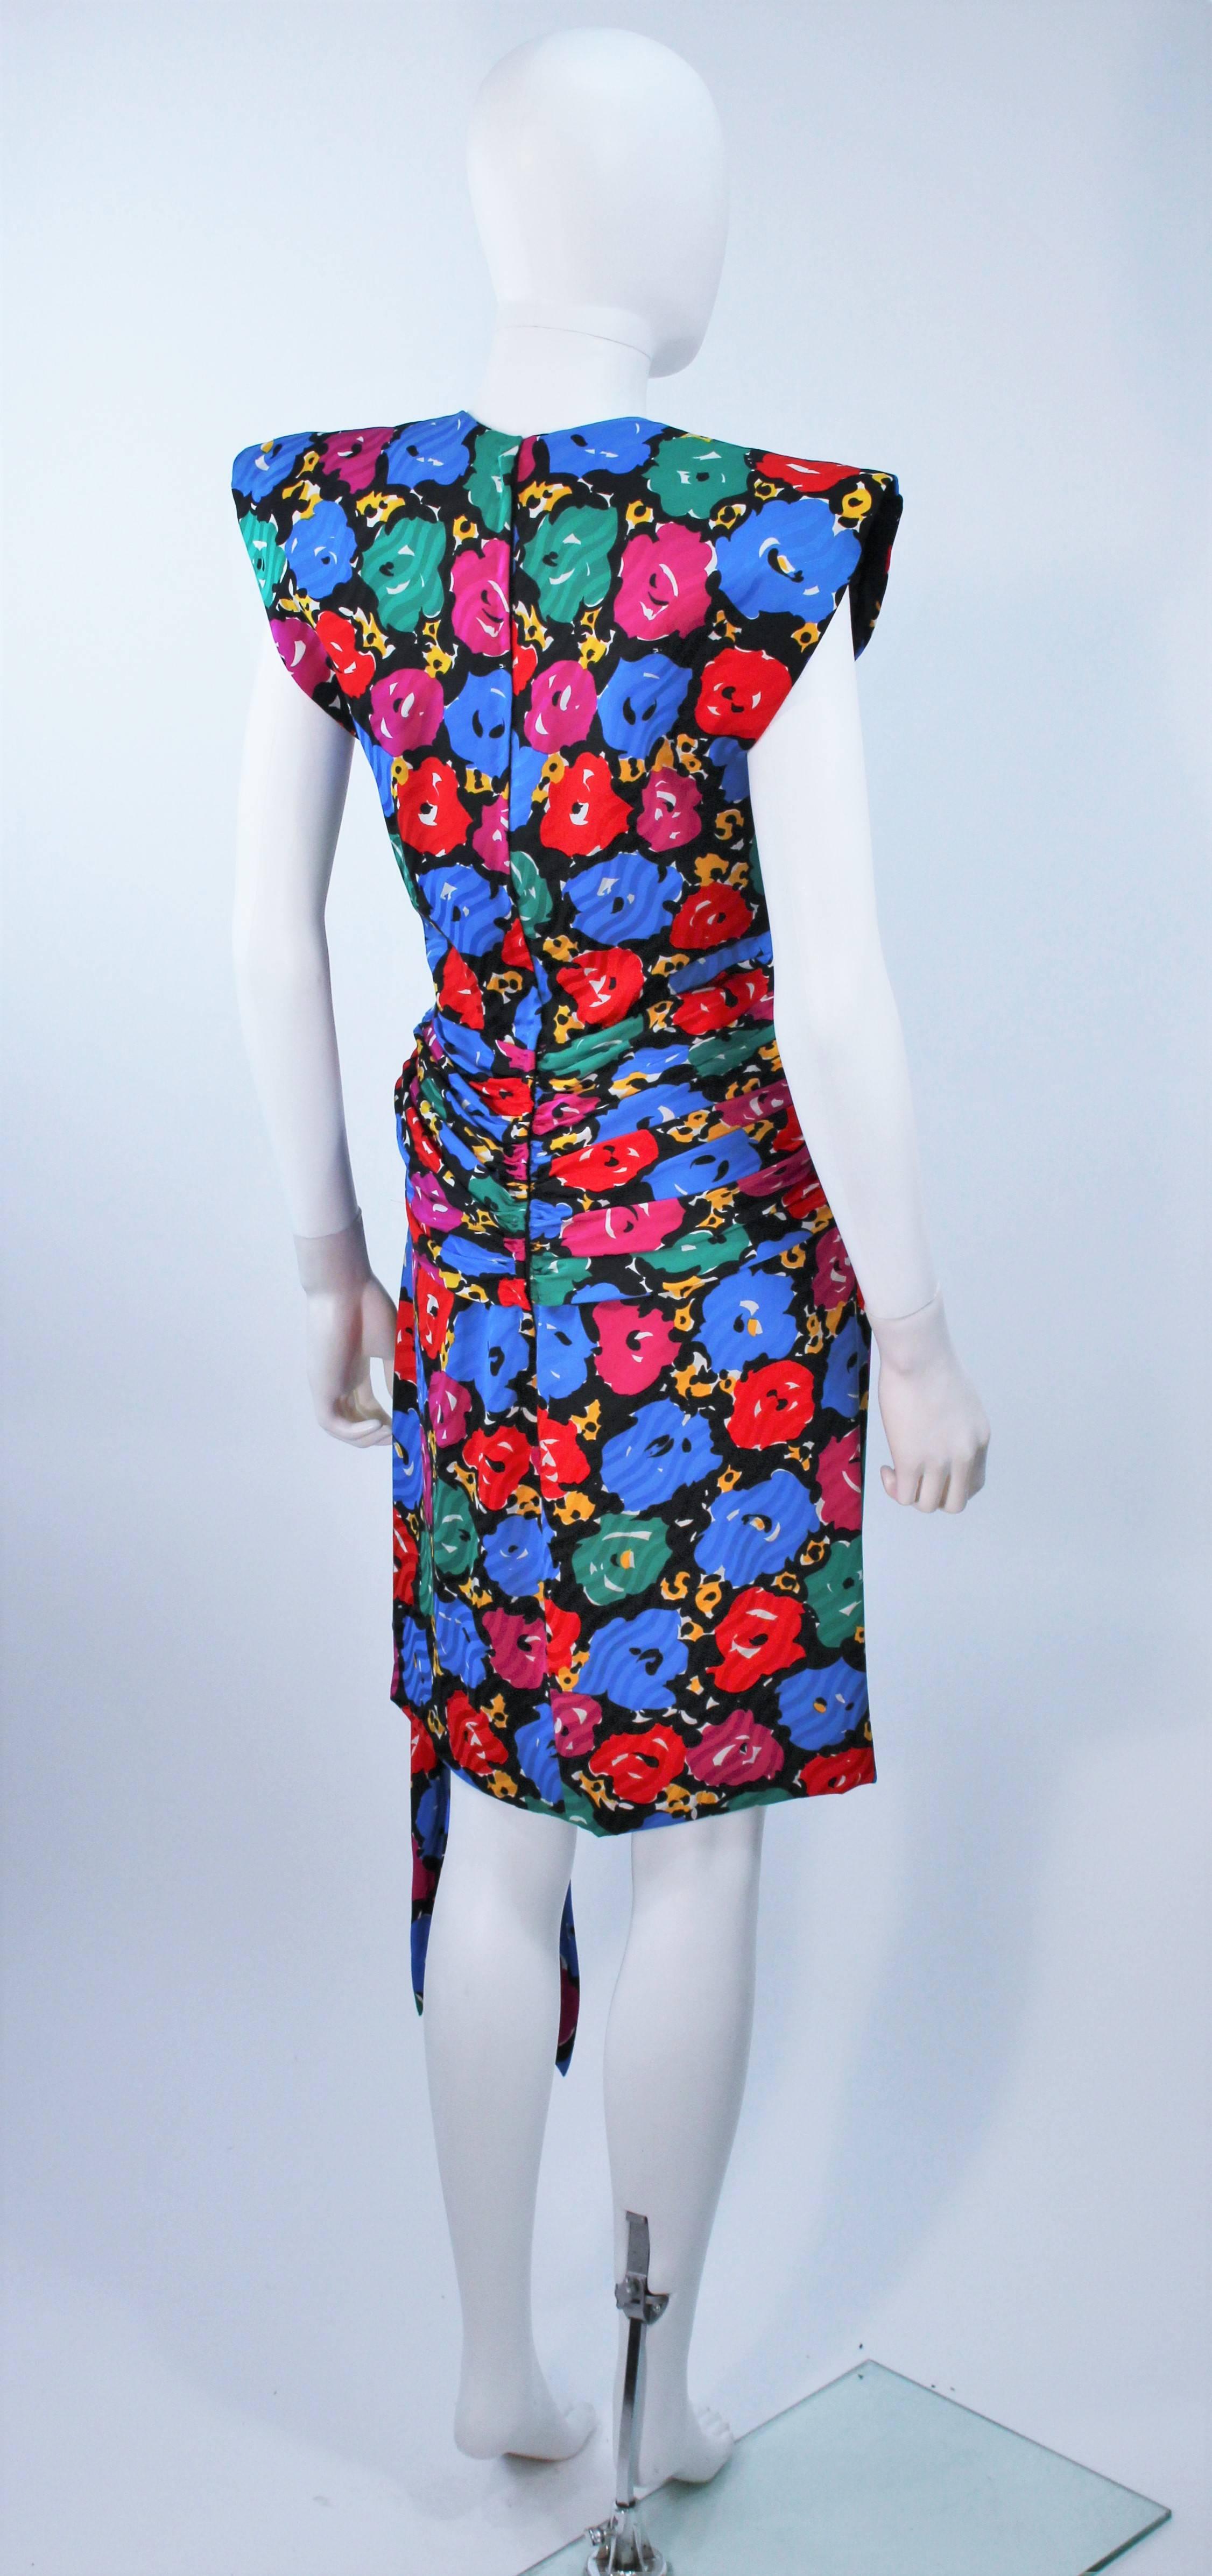 ANDREA ODICINI Floral Primary Color Print Cocktail Dress Structured Shoulder 10 In Excellent Condition For Sale In Los Angeles, CA